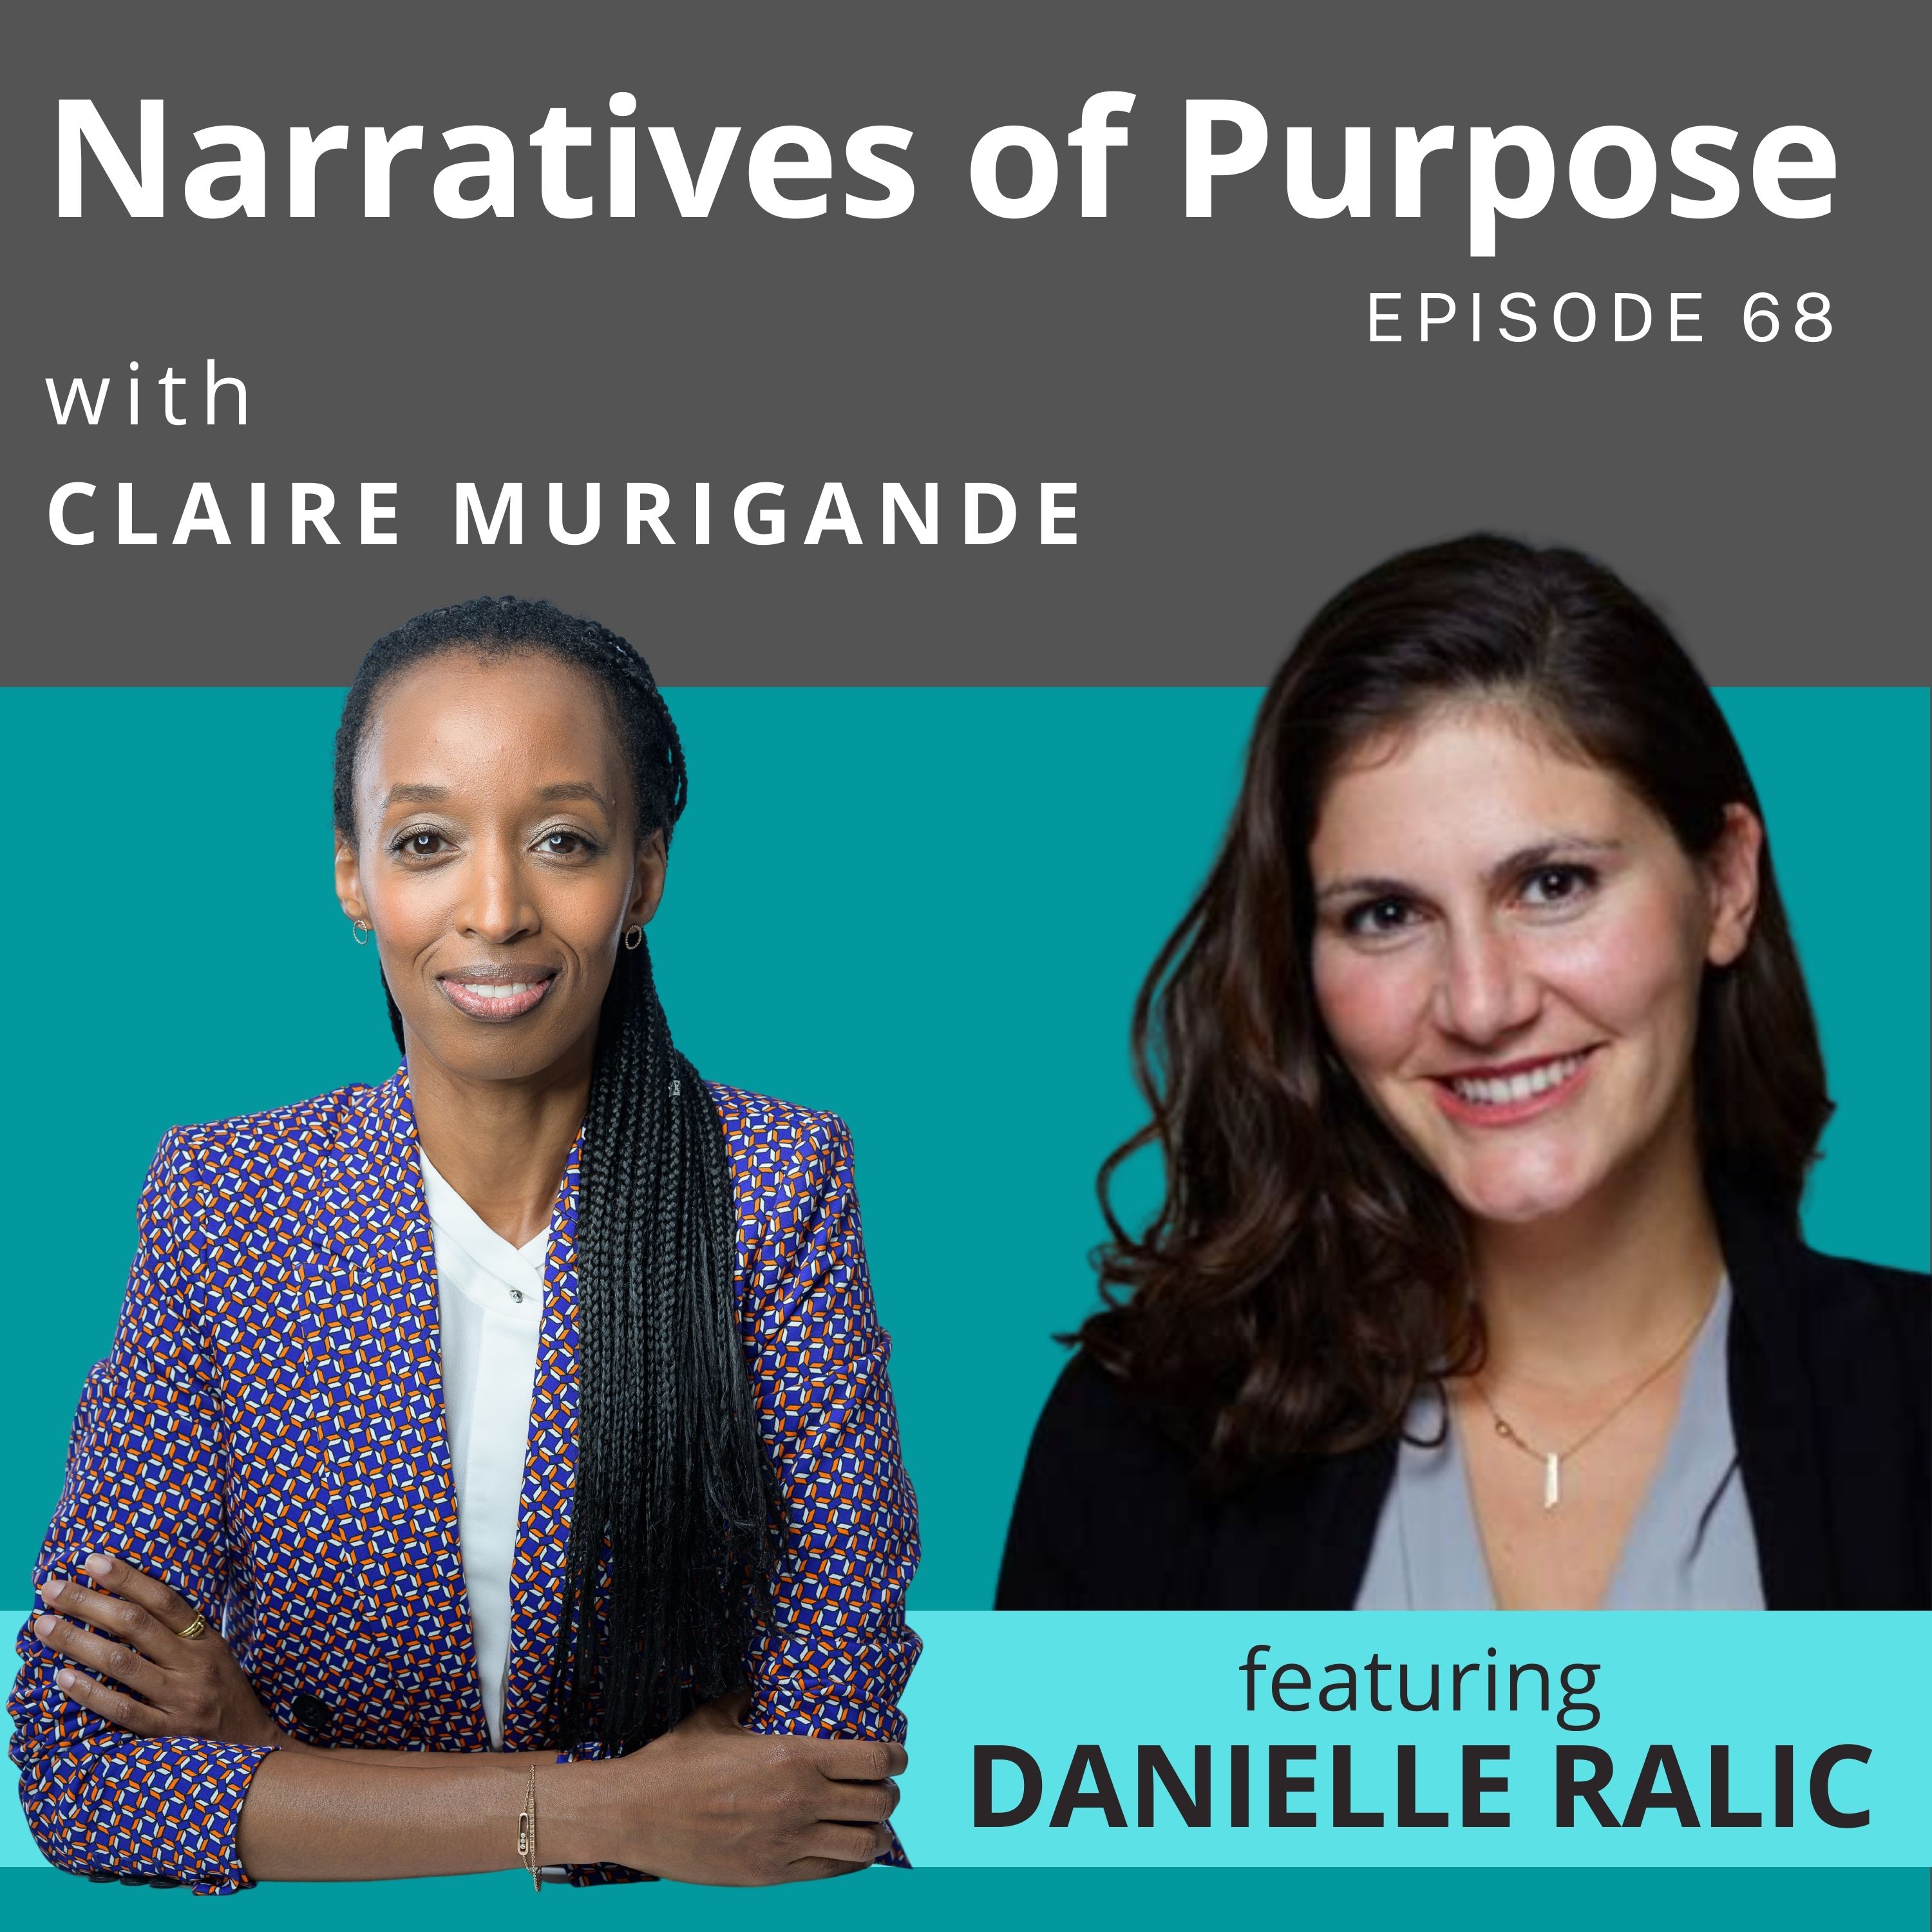 On Humanising Clinical Trials with AI - Women’s Health Series with Danielle Ralic